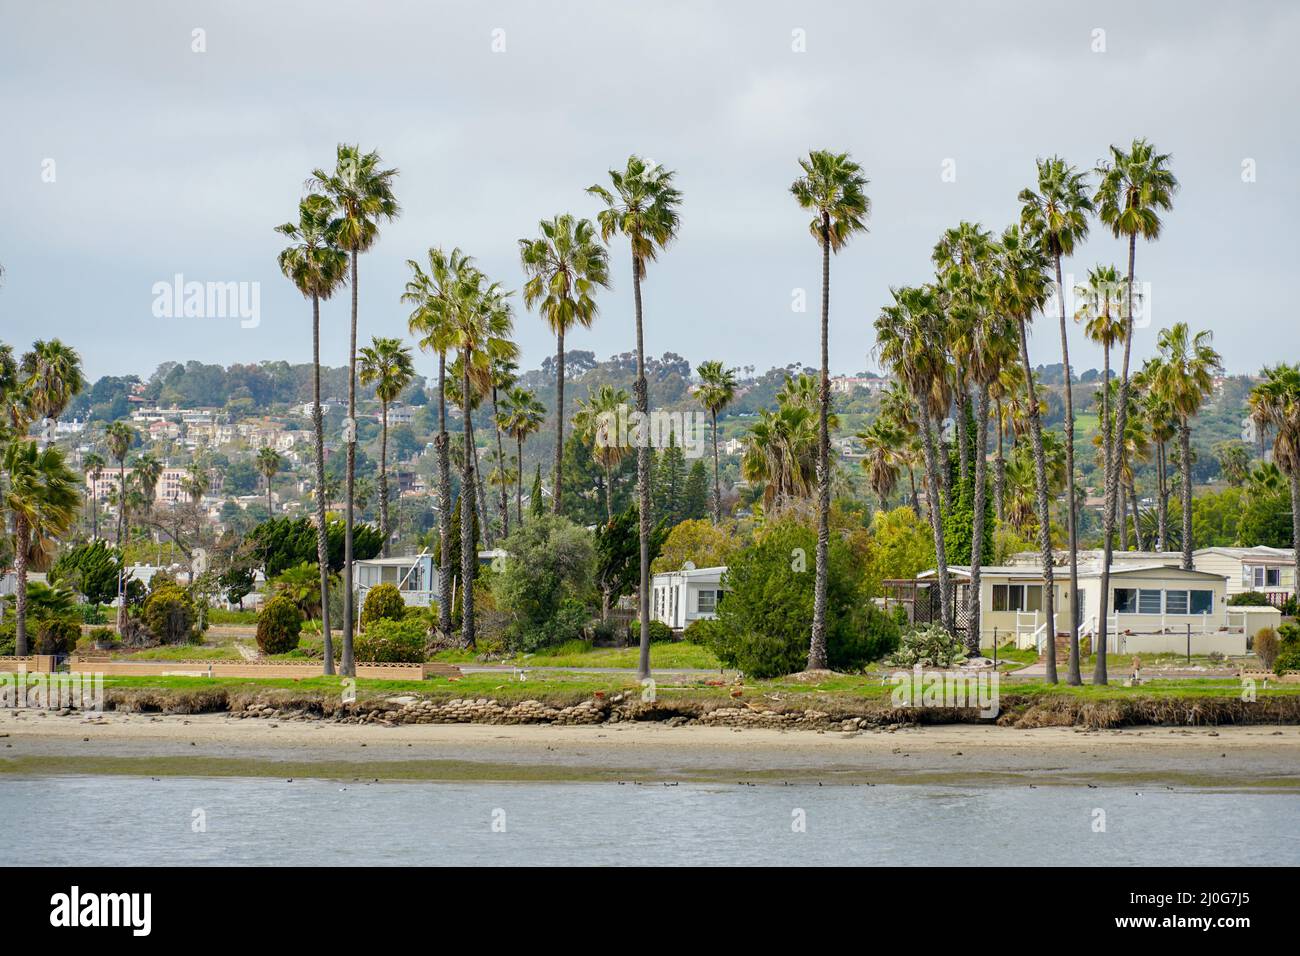 Caravan and home trailer park area next the water in the De Anza Cove in Mission Bay in San Diego Stock Photo